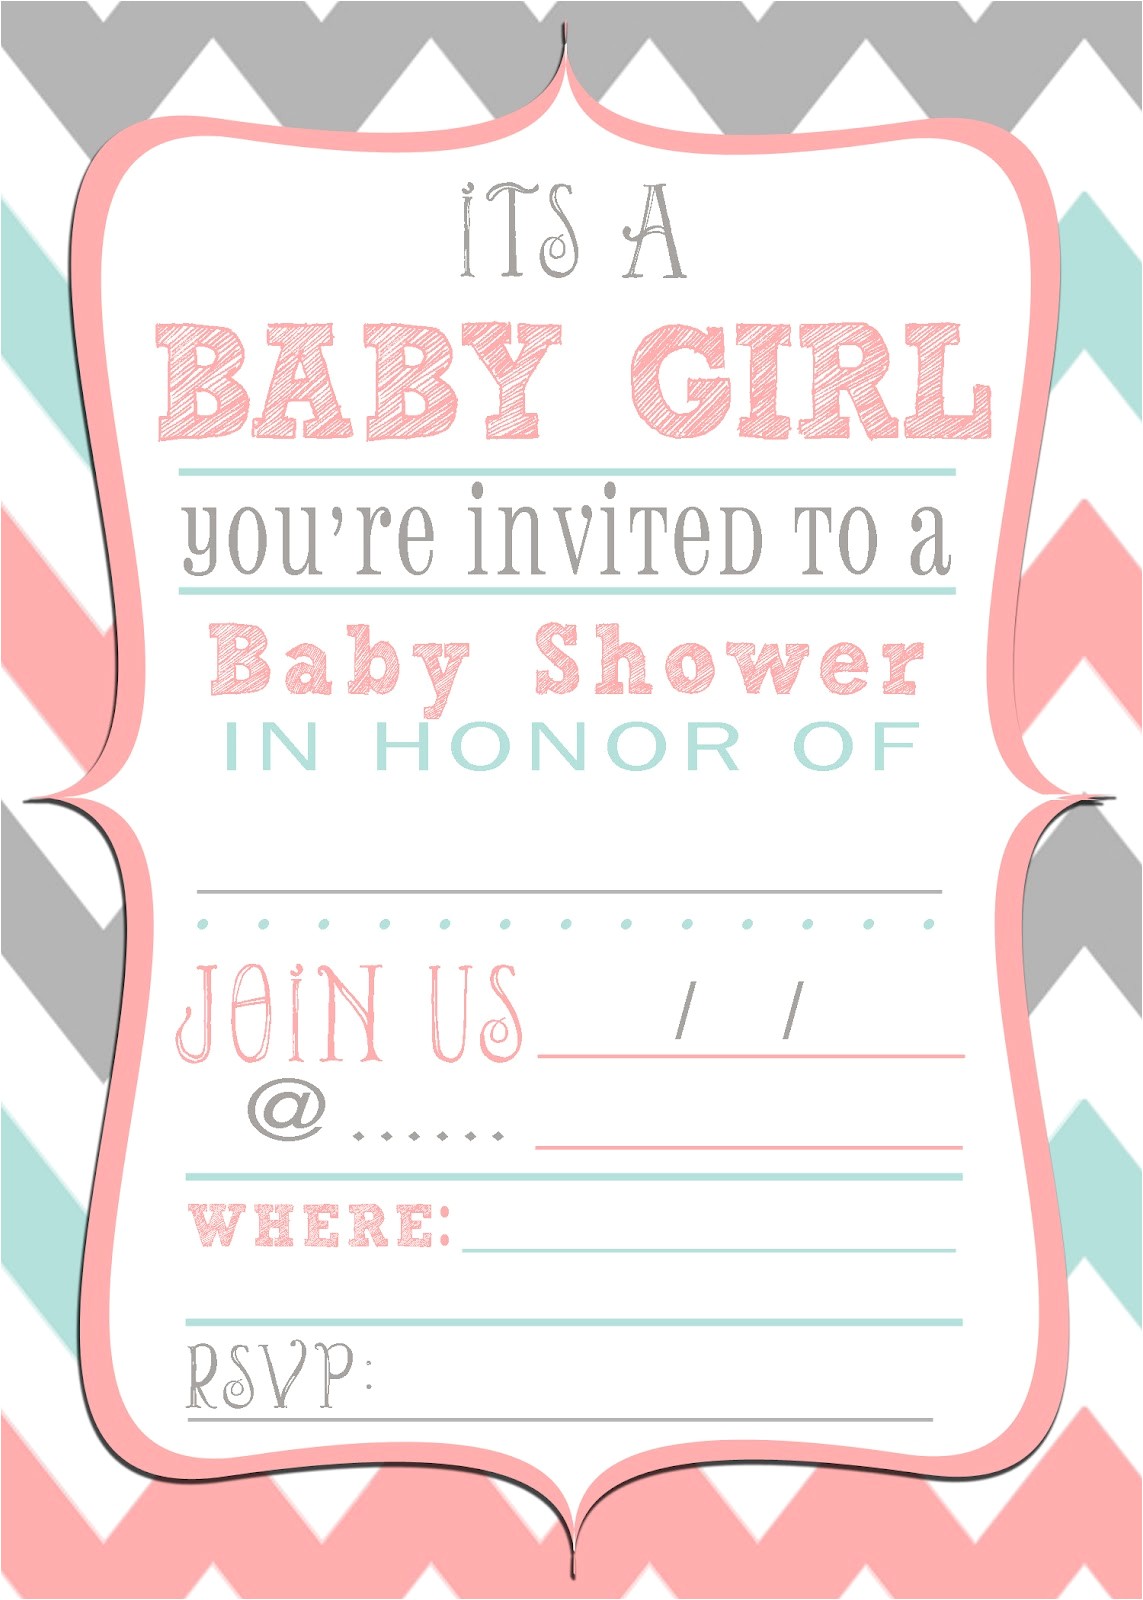 Baby Shower Invitations Printable Templates Mrs This and that Baby Shower Banner Free Downloads